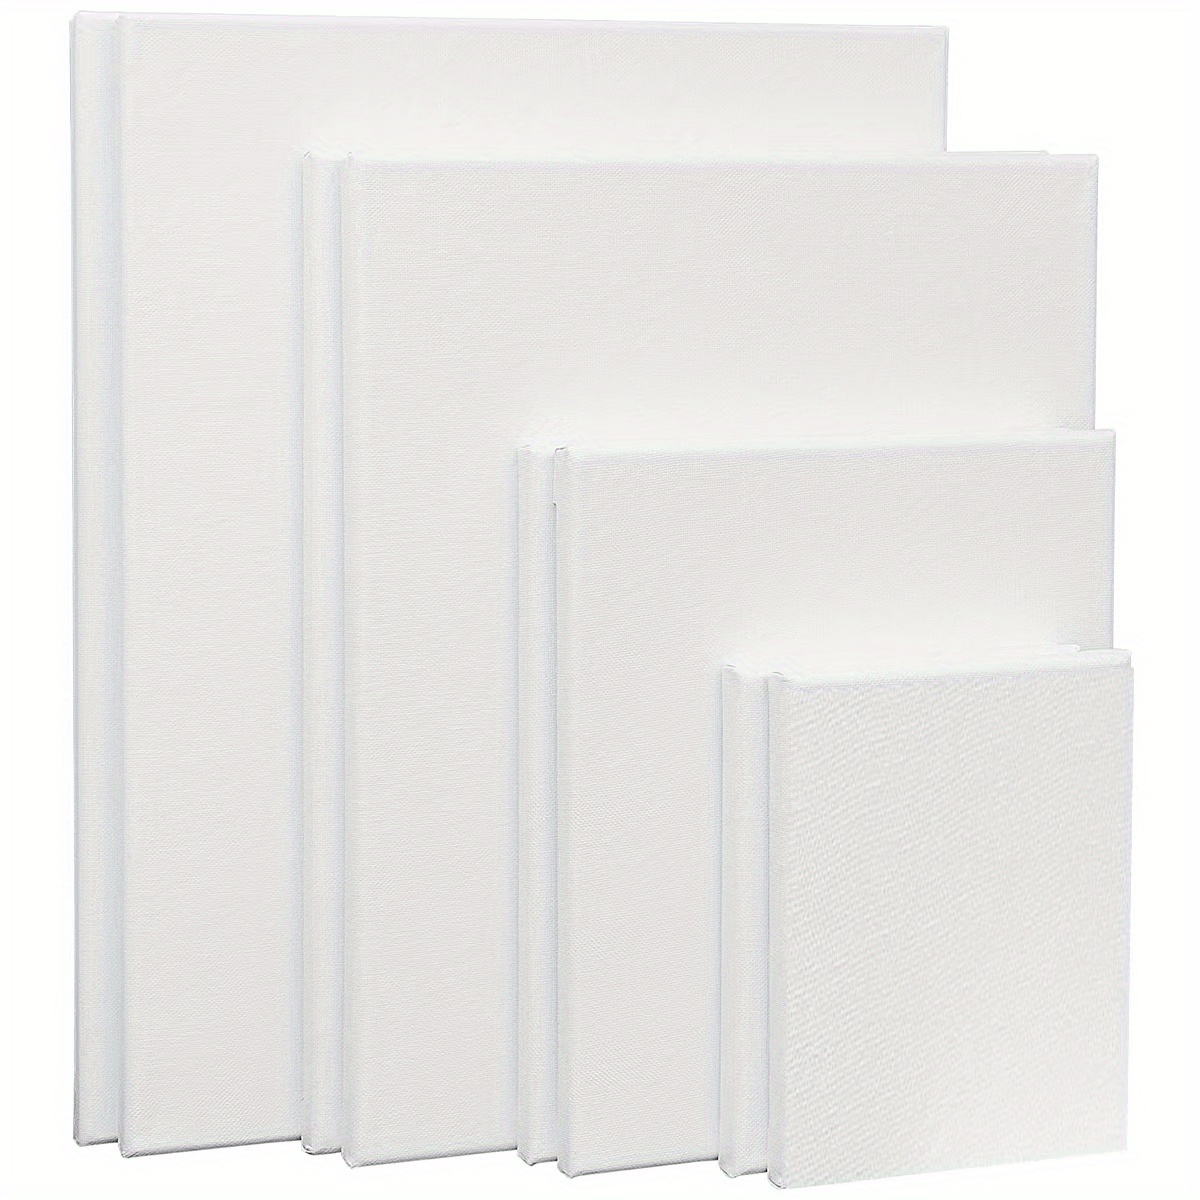 20 Pack Paint Canvases for Painting 8x10 Blank Art Canvases for Painting  Multipack Panels Paint Painting Supplies Painting Canvas Art Media Small